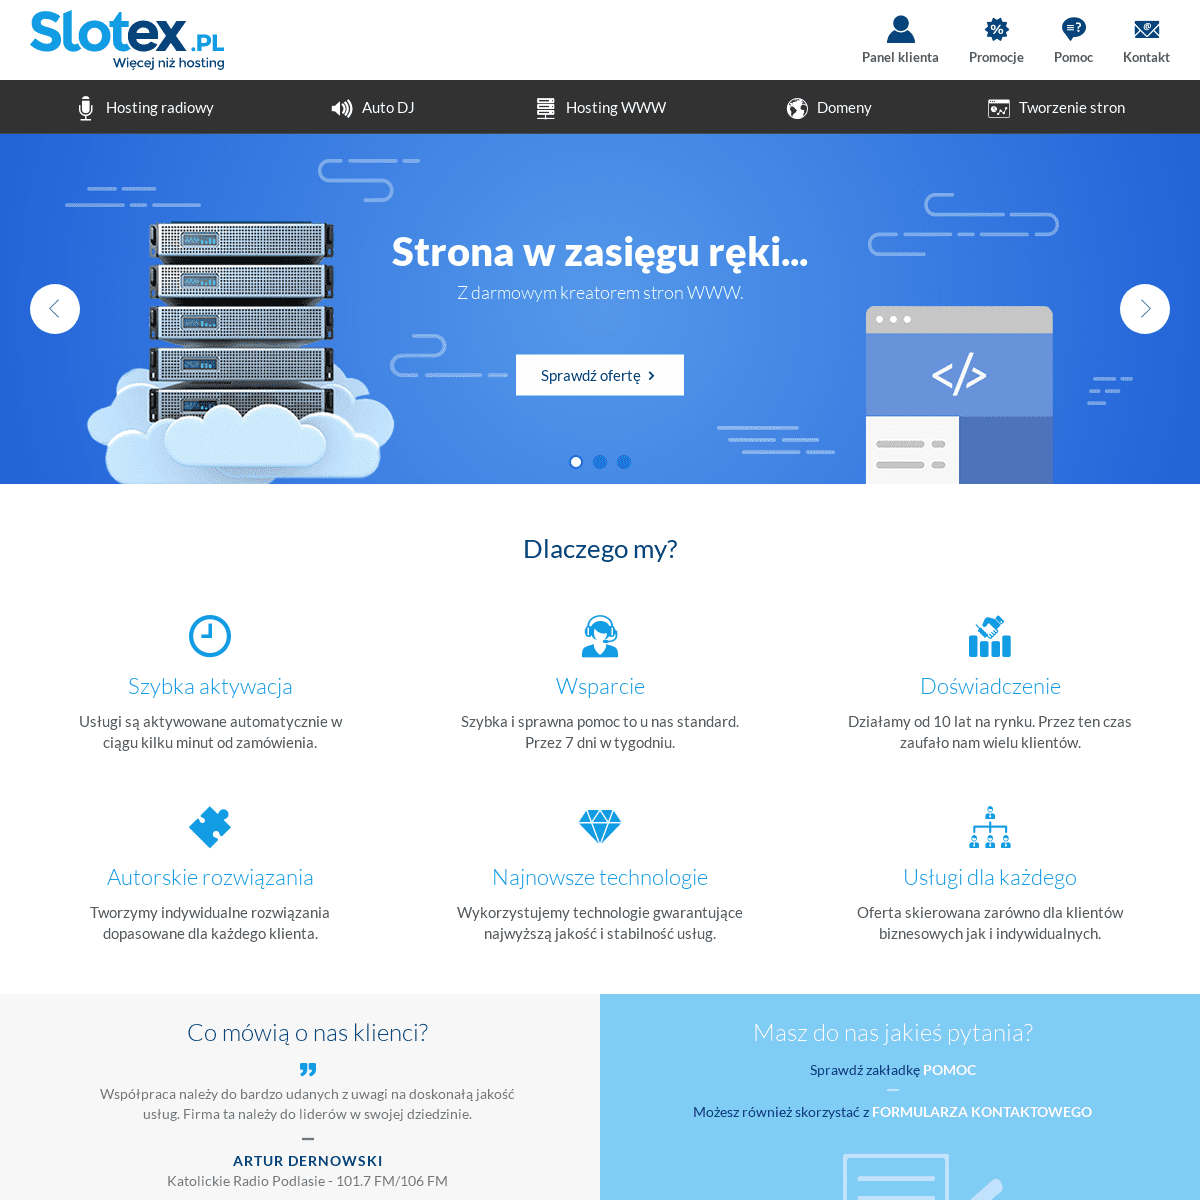 A complete backup of slotex.pl